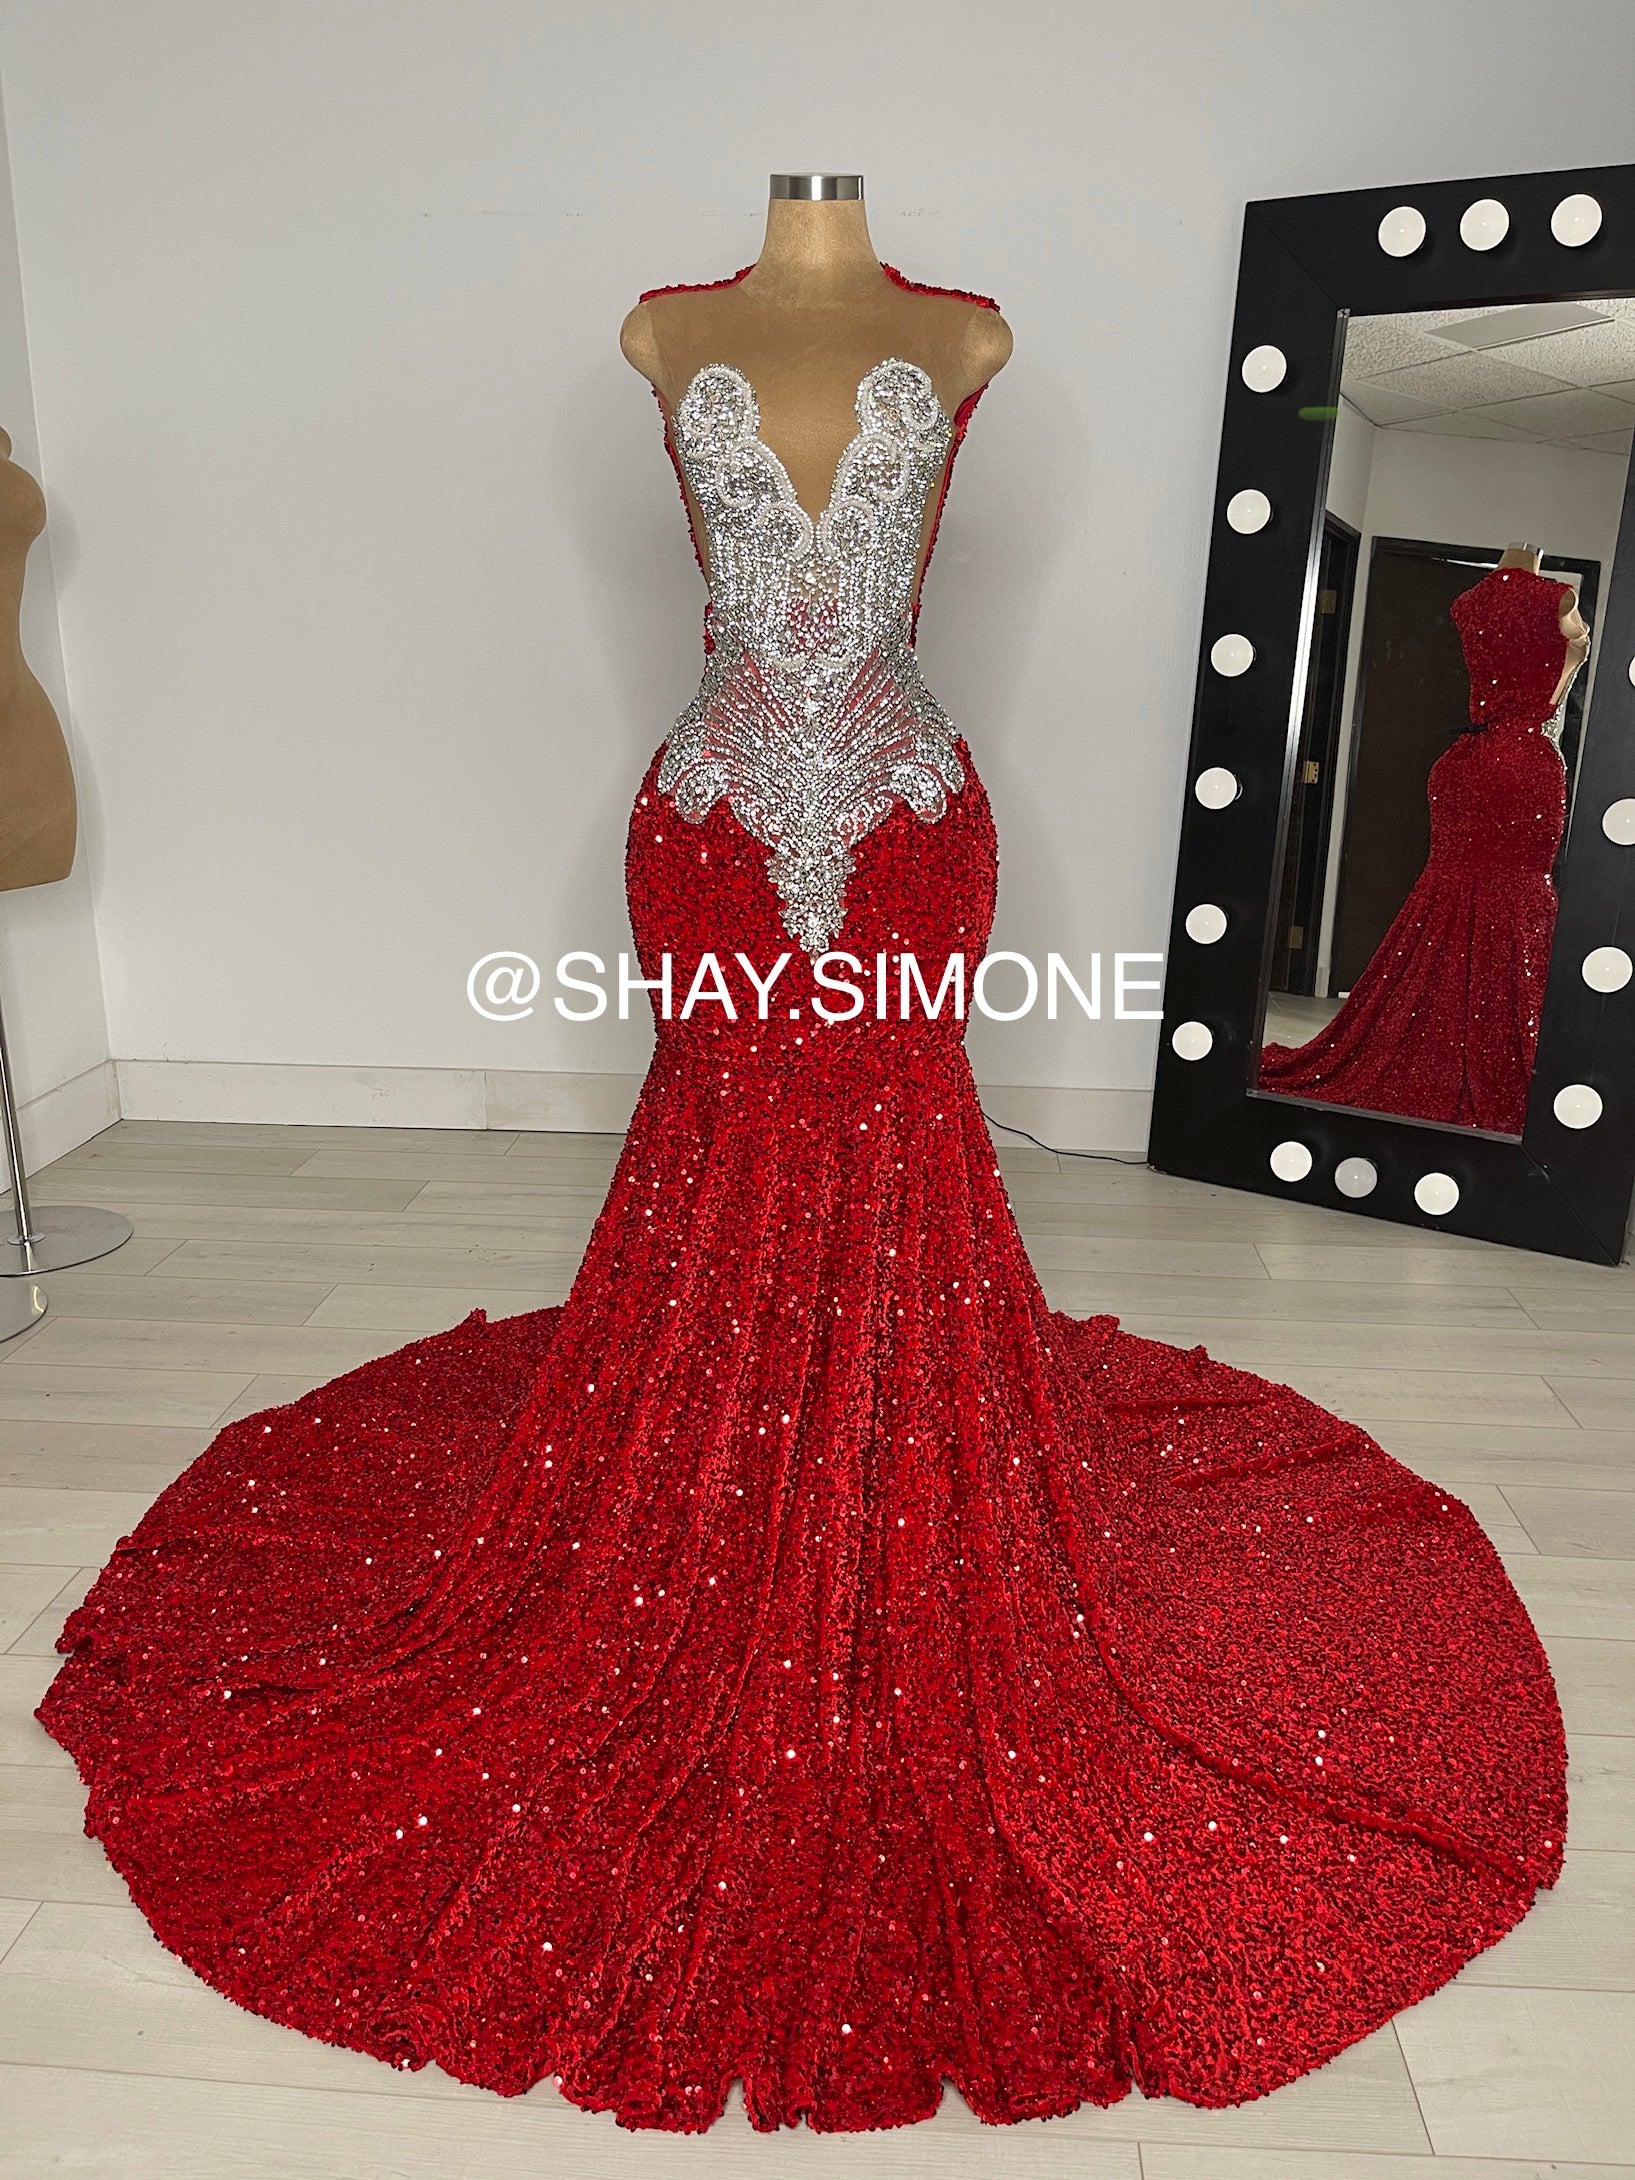 DESTINY - Red Sequin Prom Dress with Silver Rhinestones | PREORDER -  SHIP: 03/29 - 04/05